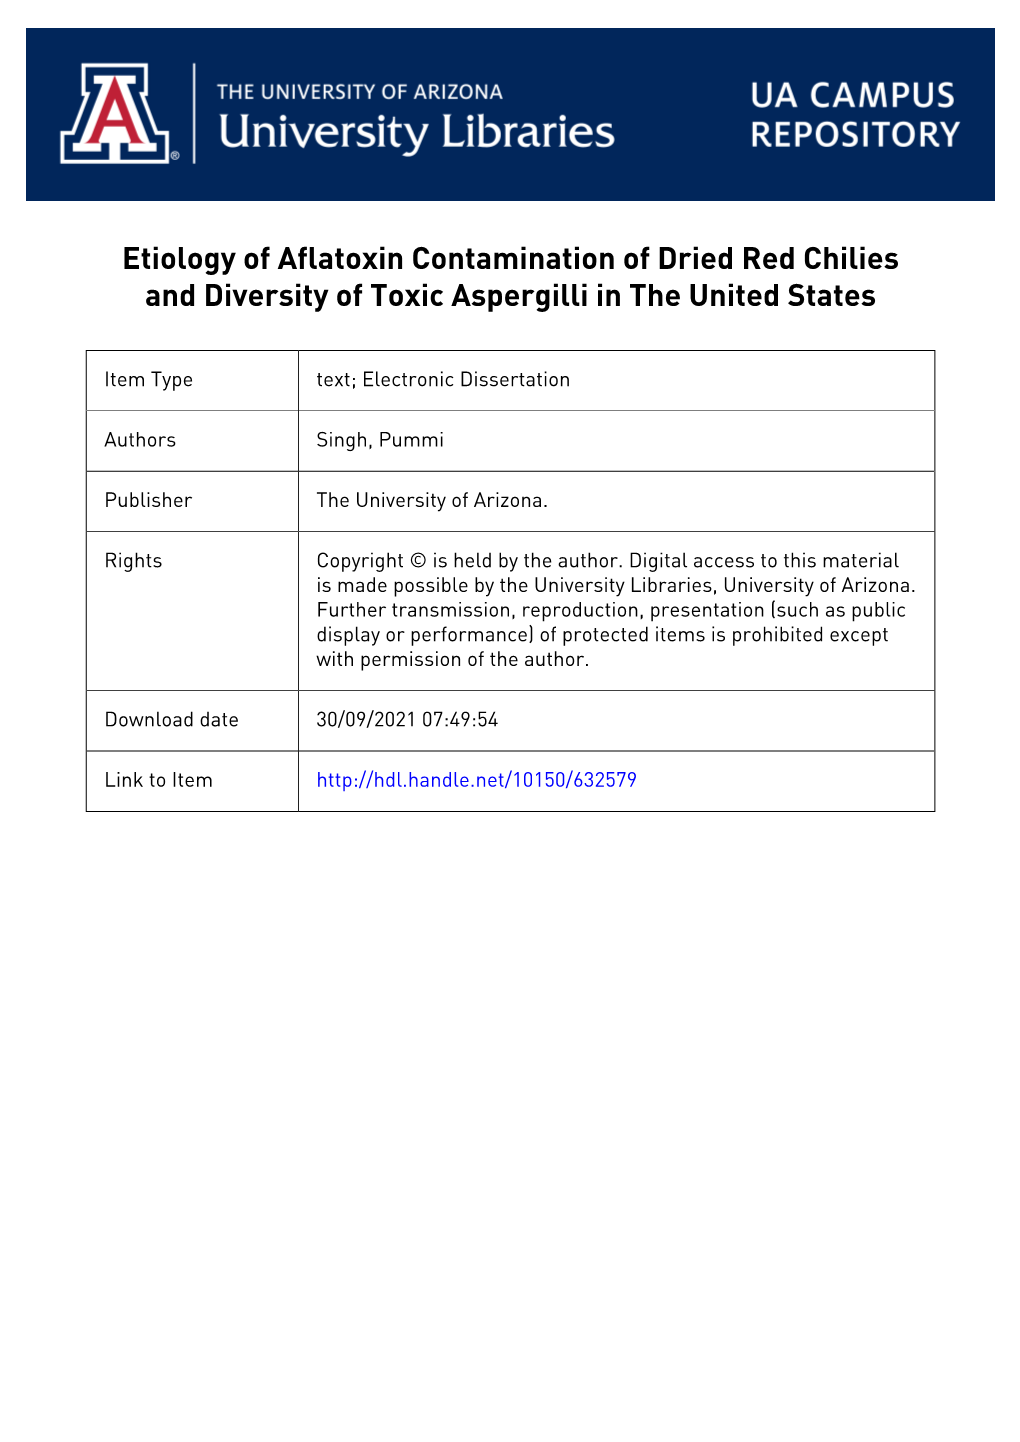 Etiology of Aflatoxin Contamination of Dried Red Chilies and Diversity of Toxic Aspergilli in the United States